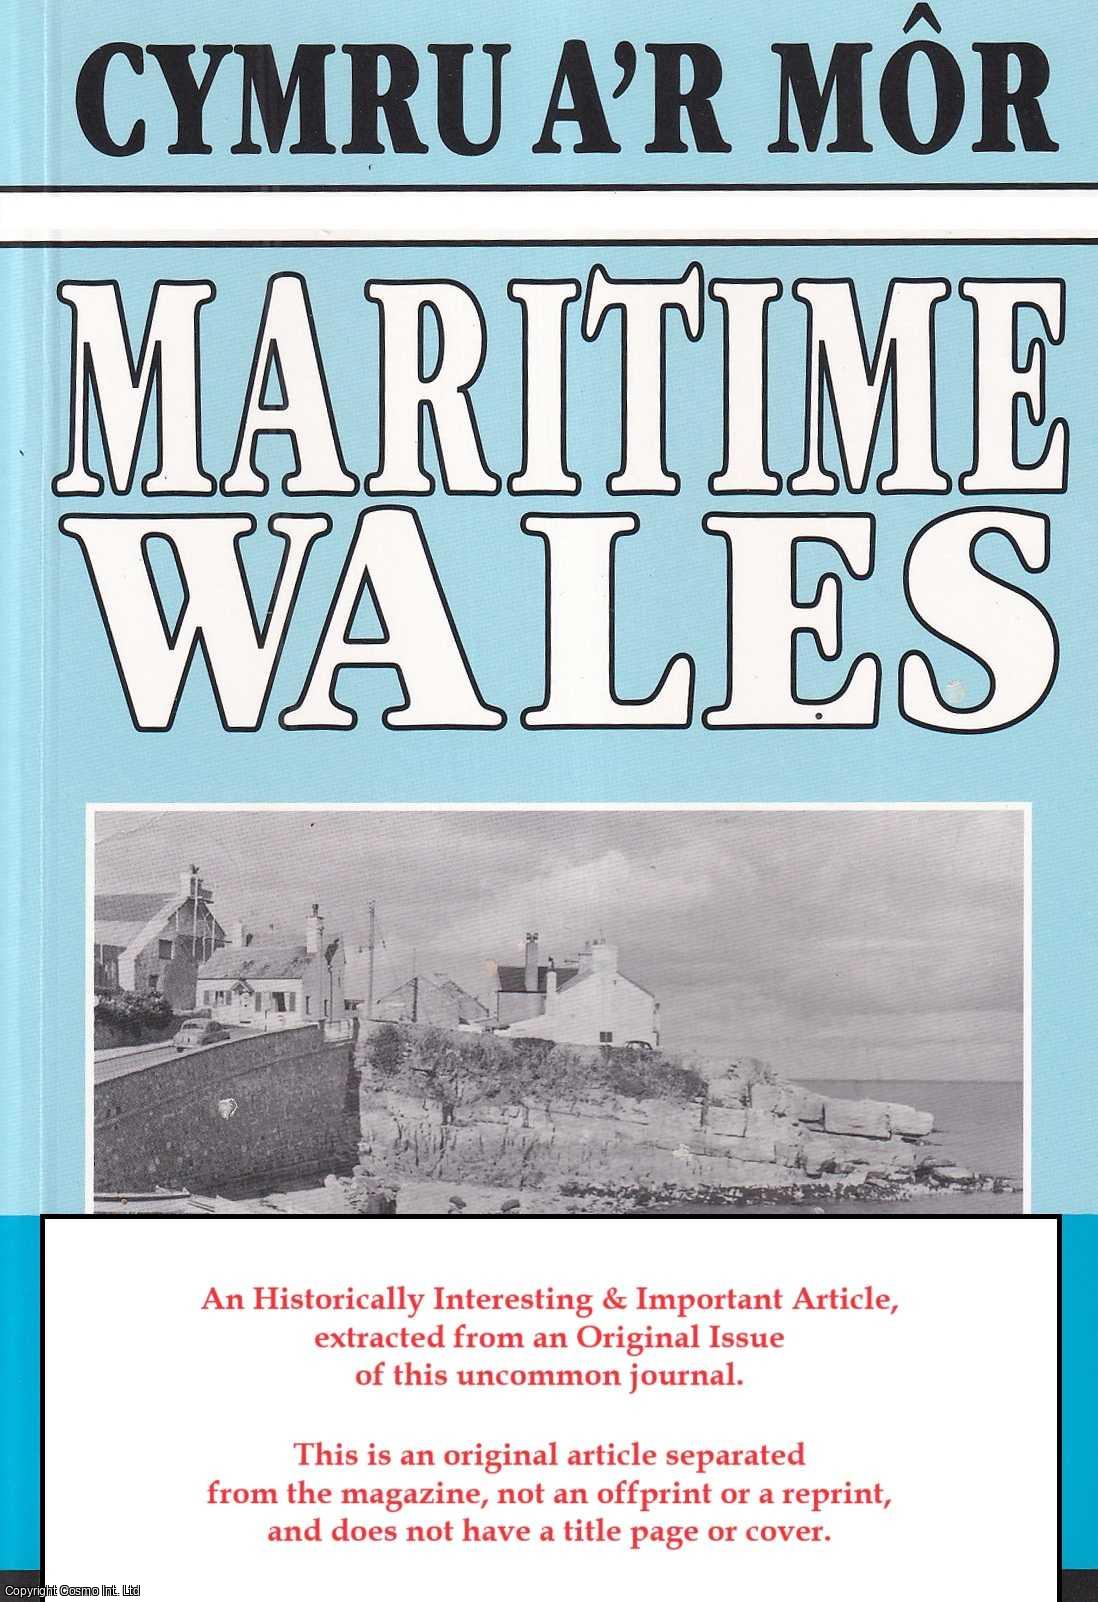 M. K. Stammers - Irish Sea Wherries, Schooners or Shallops. An original article from Maritime Wales, 1990.